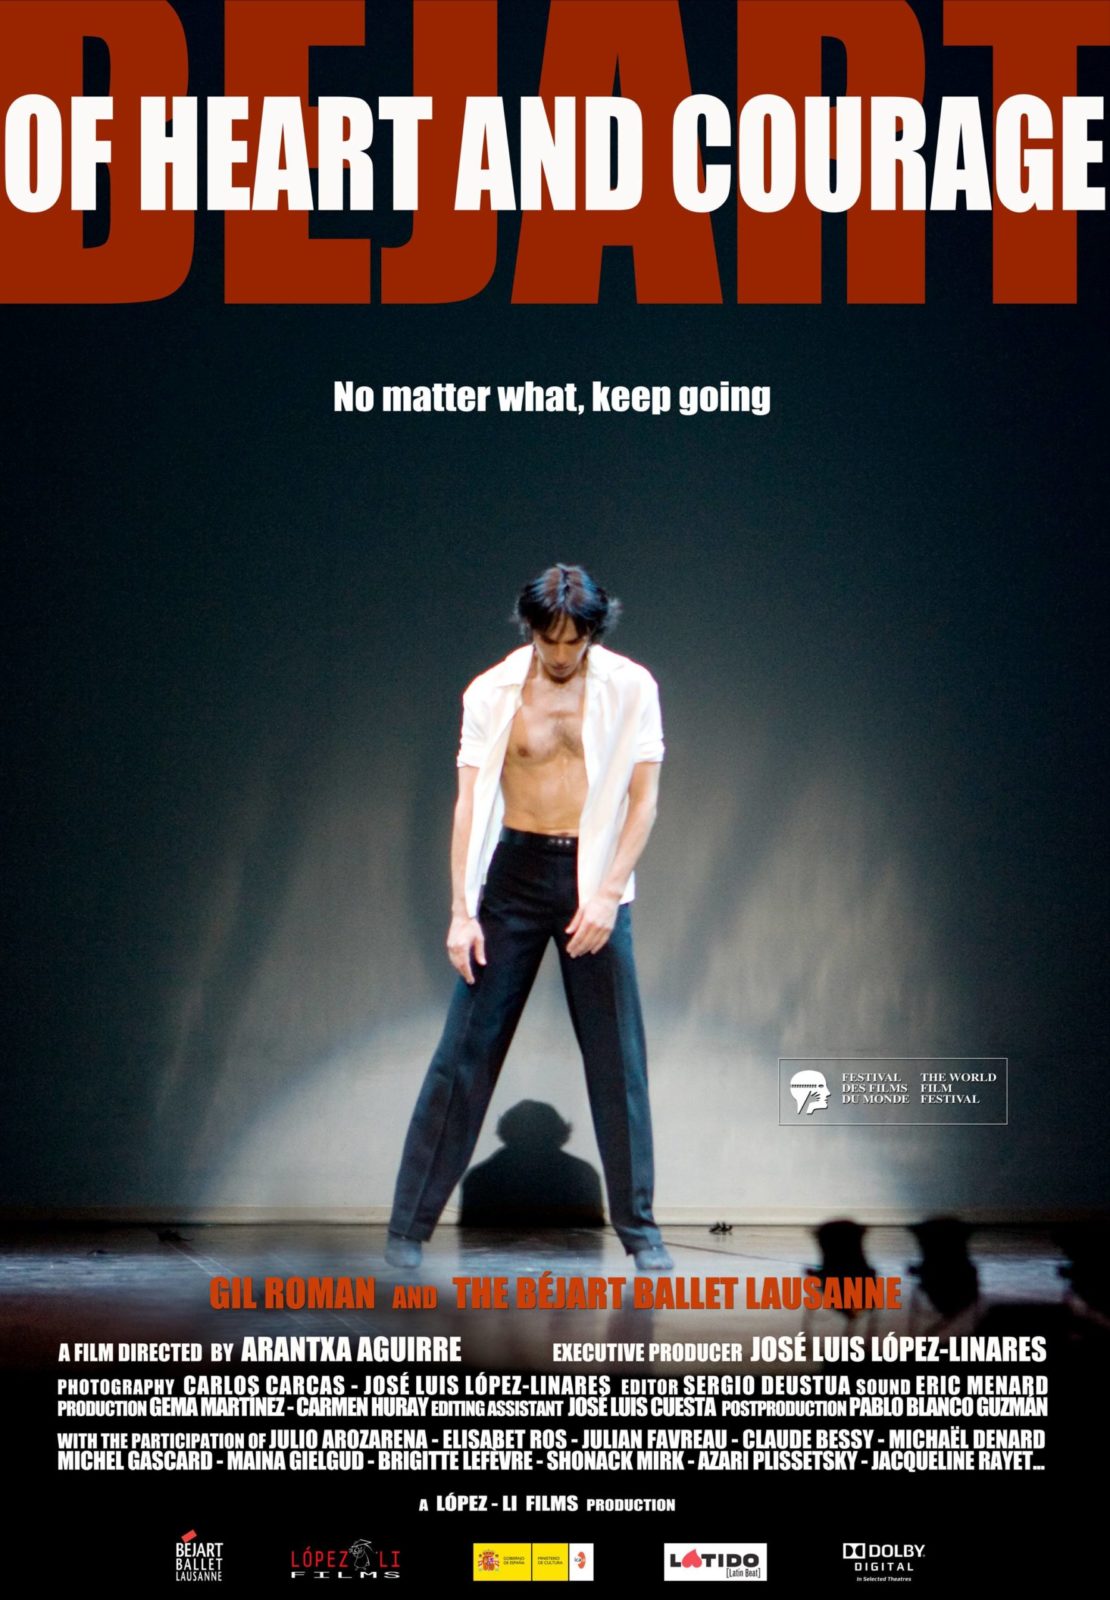 BEJART BALLET LAUSANNE, OF HEART AND COURAGE